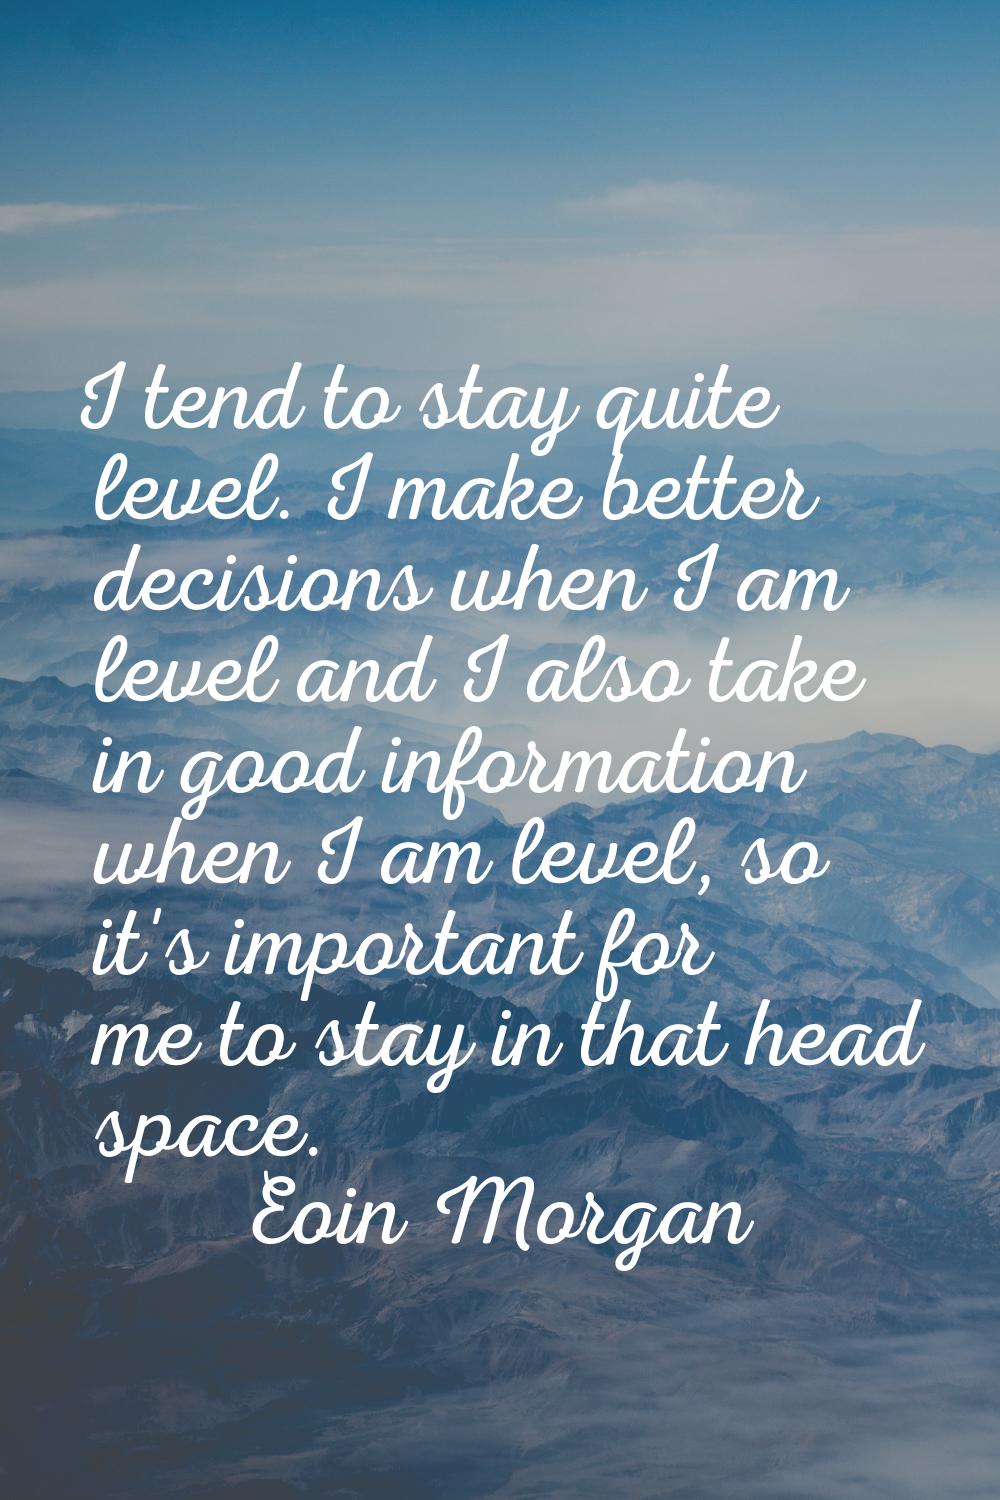 I tend to stay quite level. I make better decisions when I am level and I also take in good informa